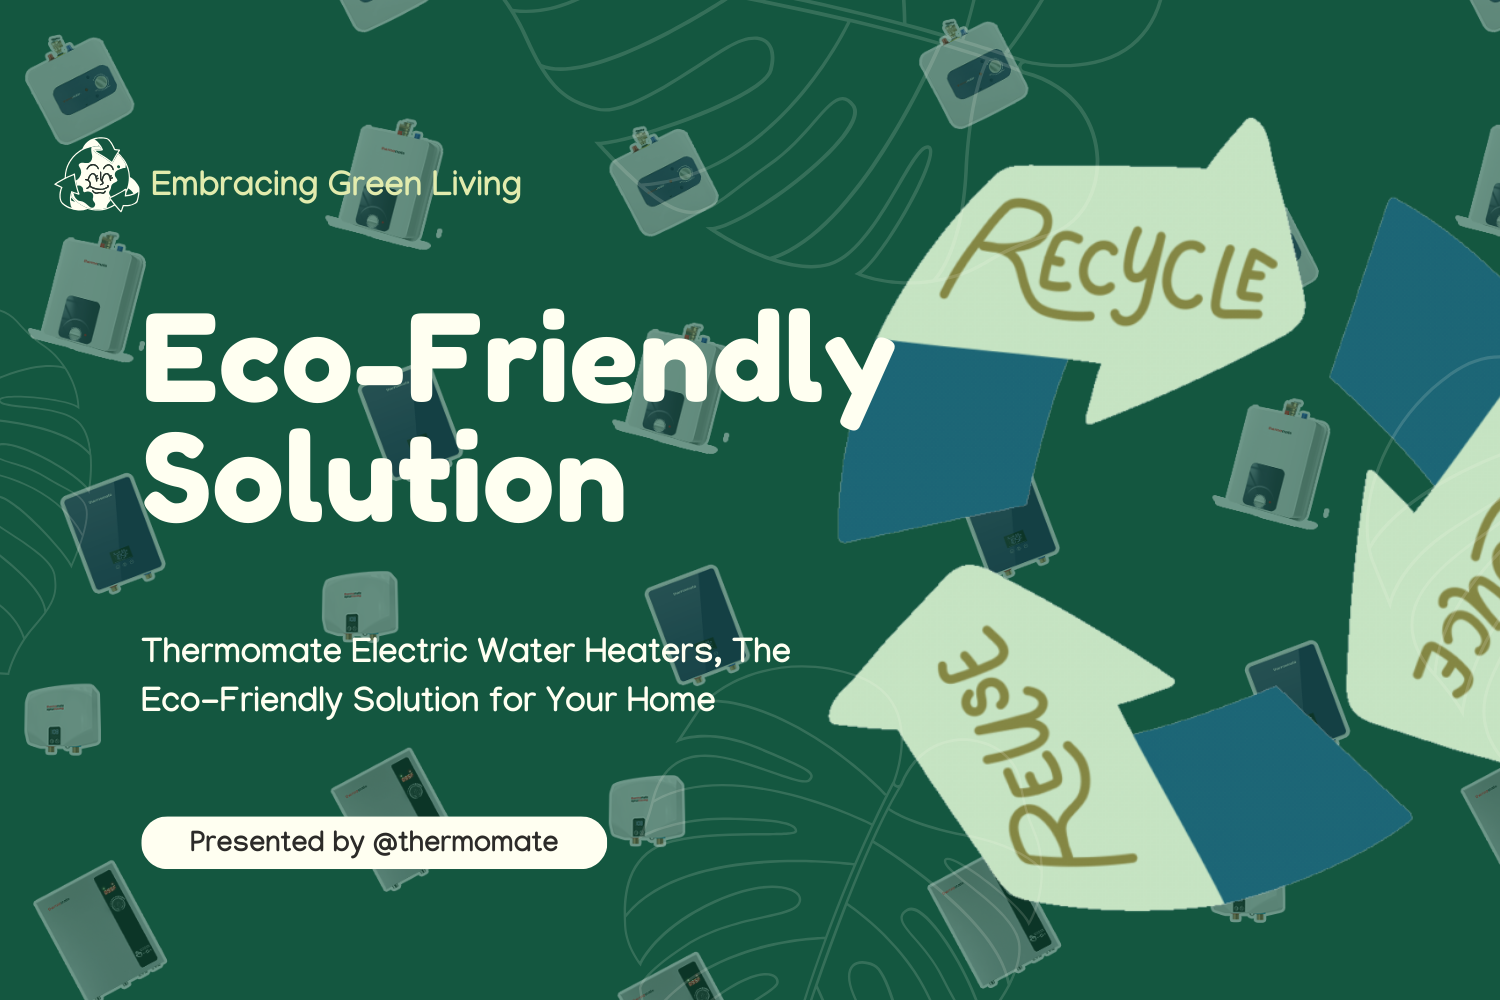 Electric Water Heaters: The Eco-Friendly Solution for Your Home | Thermomate